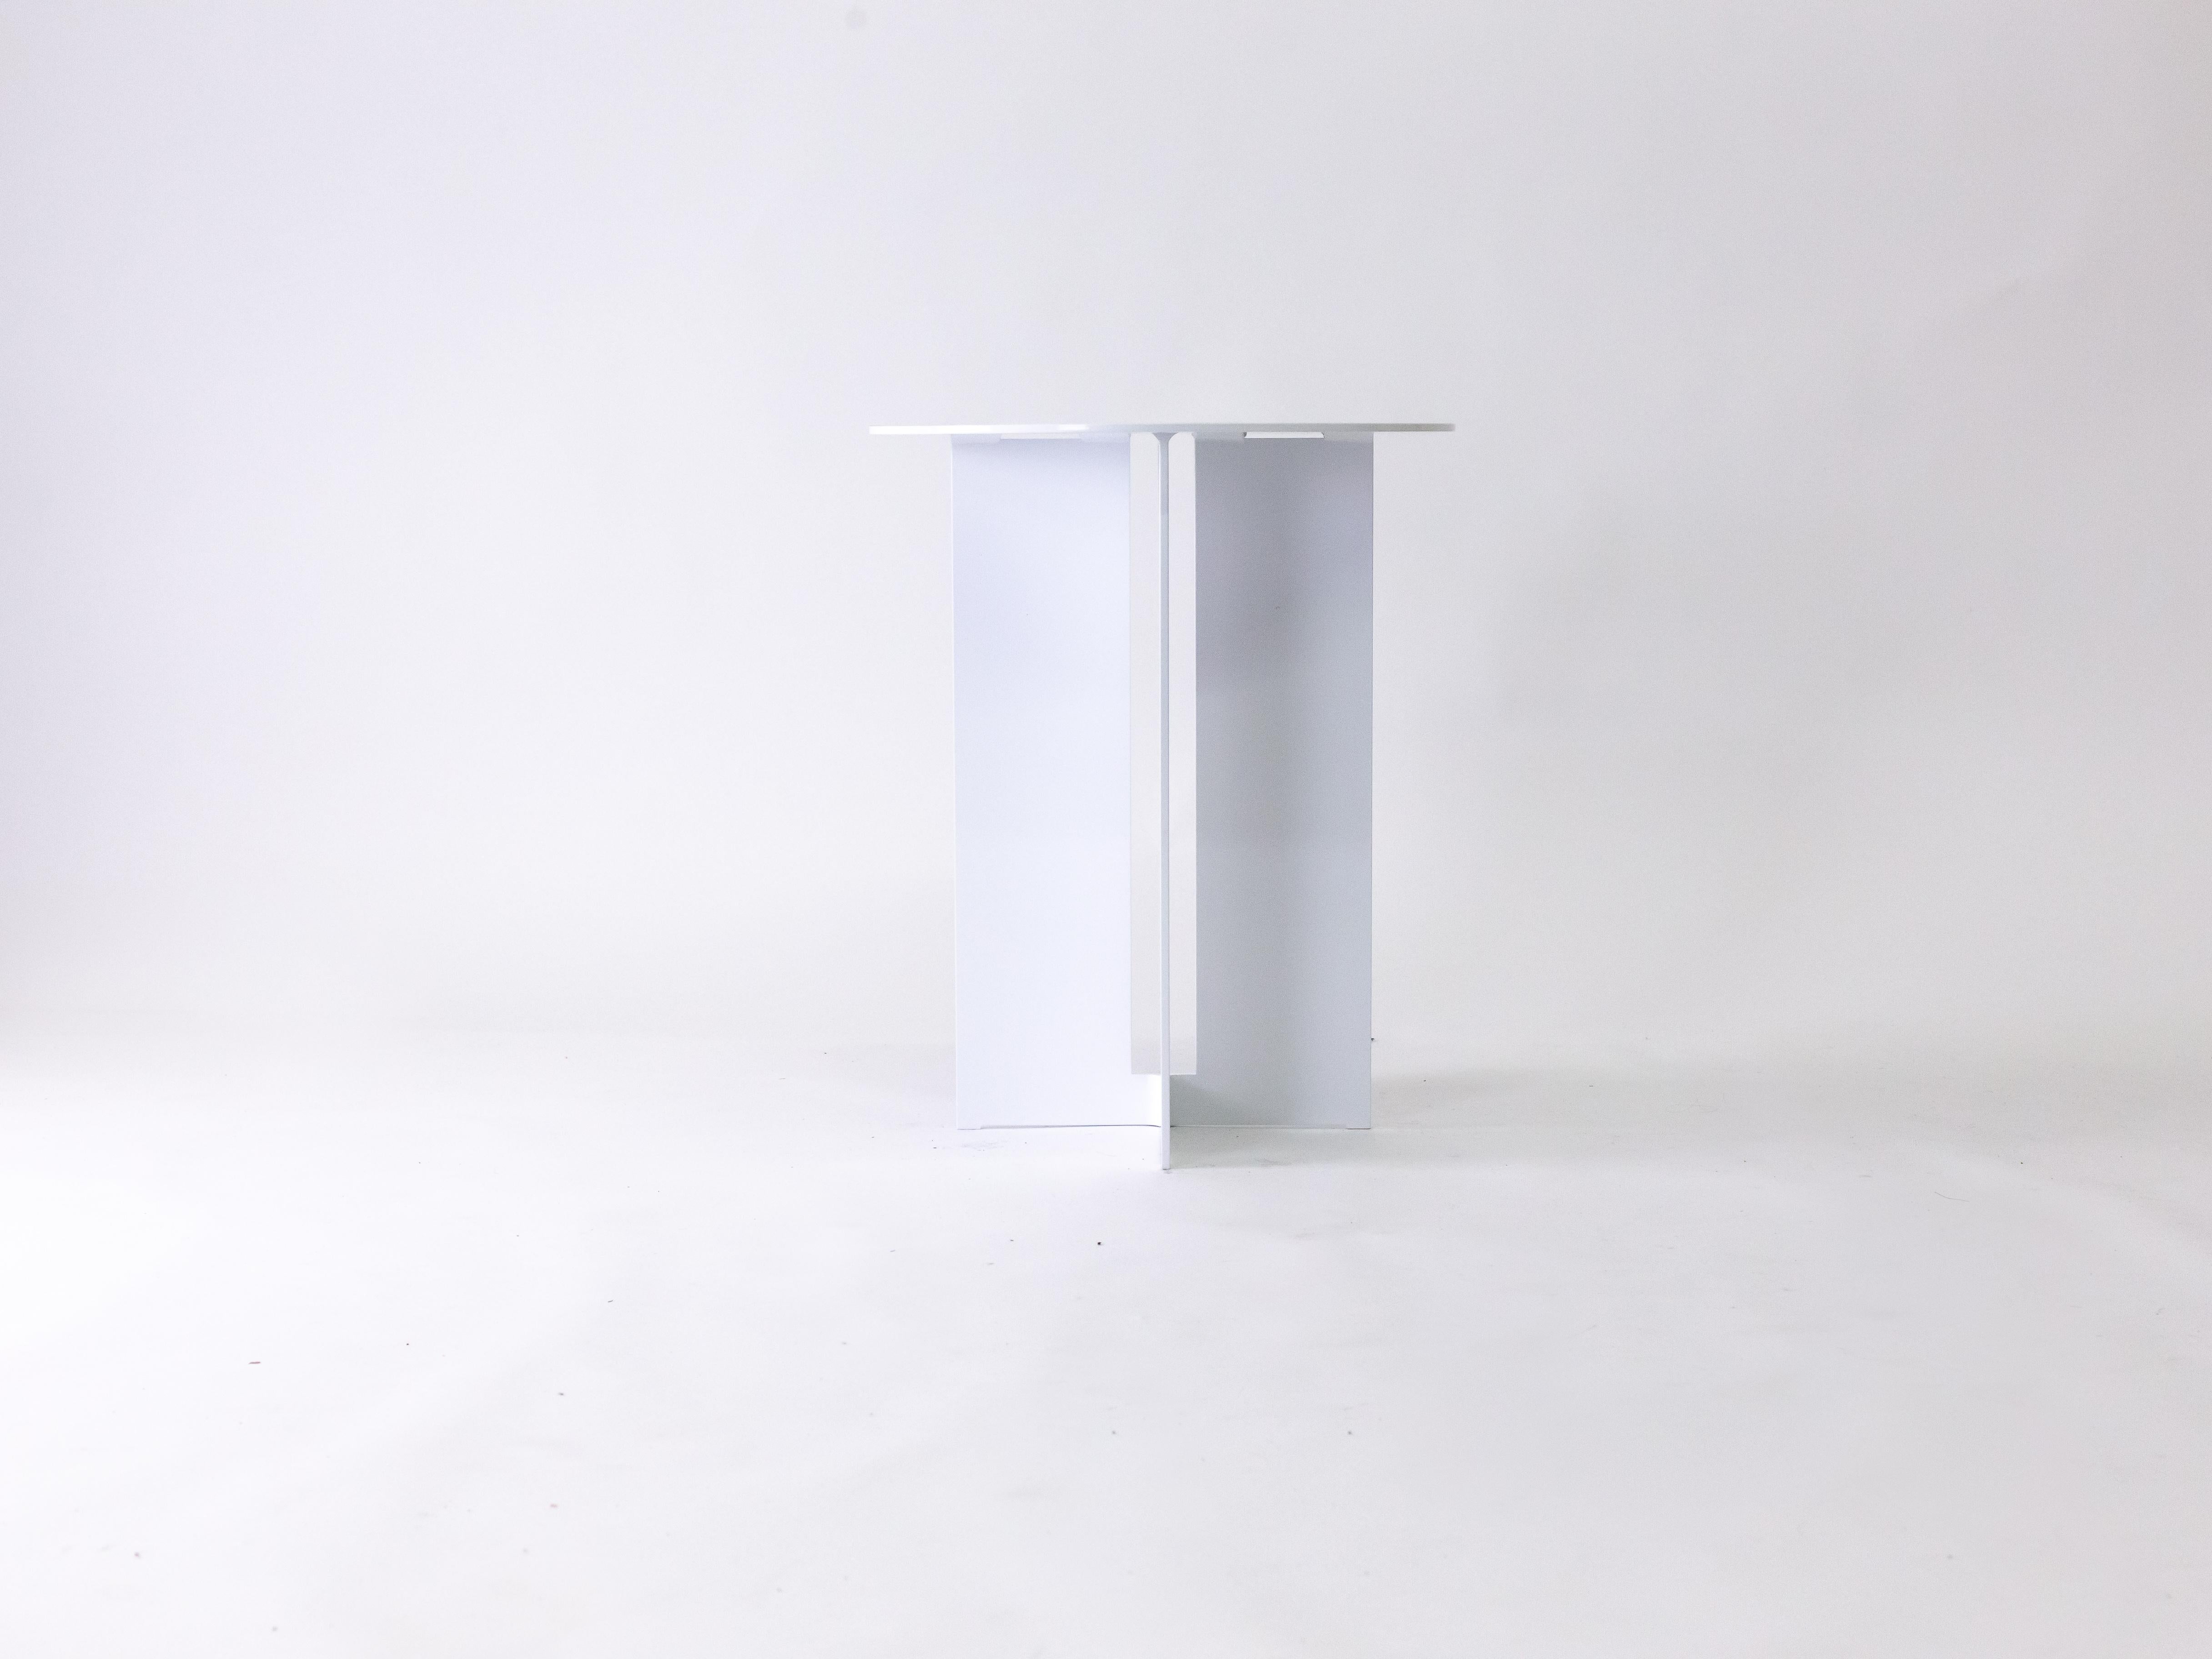 The Mers Side Table is fabricated from solid aluminum and is suitable for use indoors and out. Form is inspired by the simple utilitarianism of West Coast aluminum fishing boats.

Shown in aluminum with White painted finish.

Custom sizing and